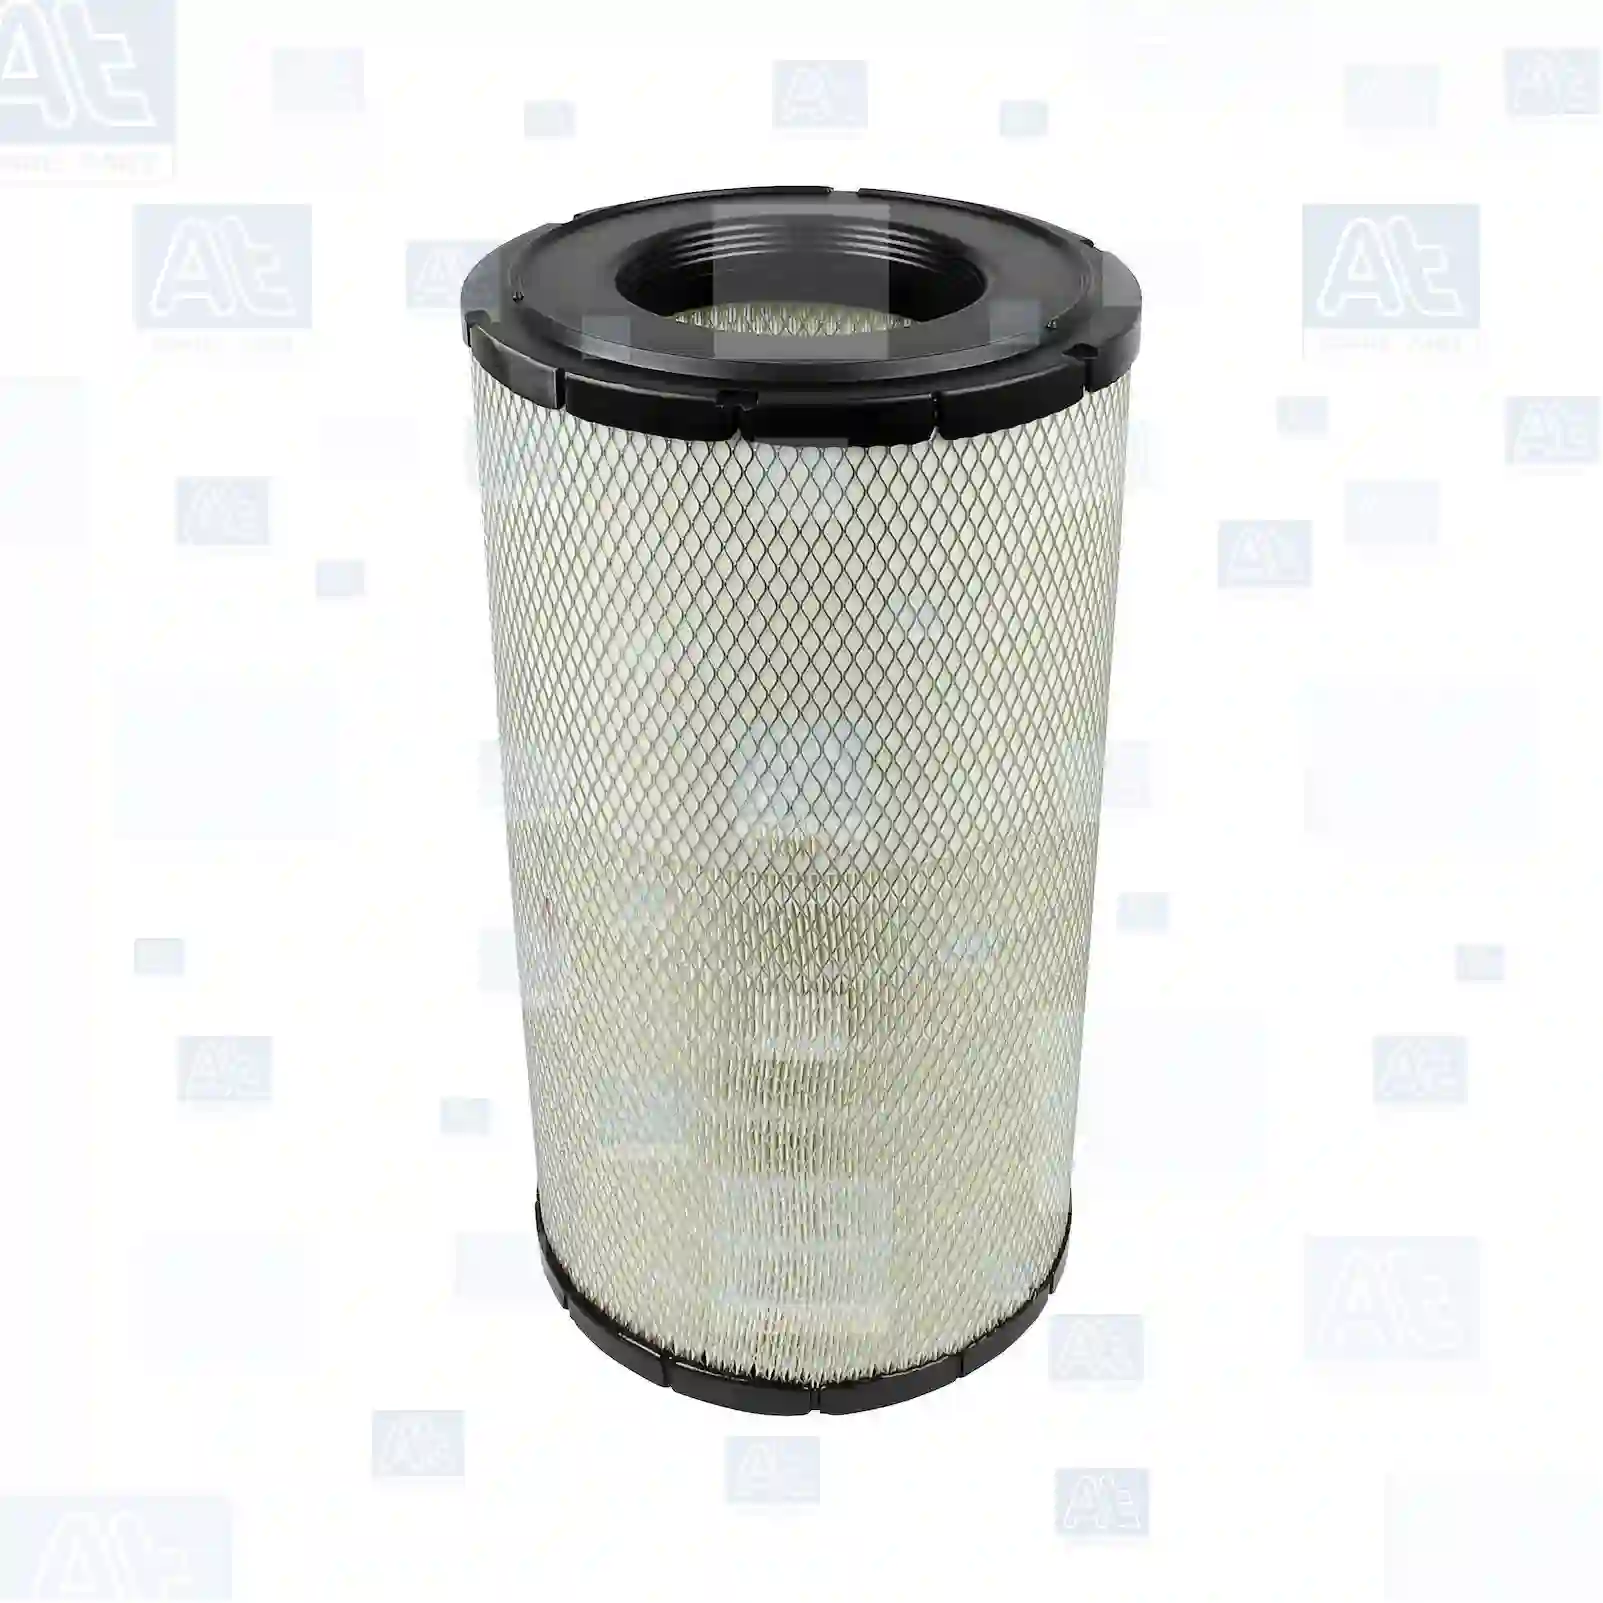 Air filter, 77706166, 52RS000351, 52RS001778, 275809A1, 87682984, KSH0933, 142-1339, 7700056504, 263G237051, 3098170830, 4459543, 4459549, 5559549, AT175223, L4459549, 32/925335, AT223226, F434394, 7281109560, 7414298, 81083040099, 3903030M1, 0254386, 0040943804, 73181672, 7420838436, 7700056504, 0114102051, 0203104000, 0203104030, 11110022 ||  77706166 At Spare Part | Engine, Accelerator Pedal, Camshaft, Connecting Rod, Crankcase, Crankshaft, Cylinder Head, Engine Suspension Mountings, Exhaust Manifold, Exhaust Gas Recirculation, Filter Kits, Flywheel Housing, General Overhaul Kits, Engine, Intake Manifold, Oil Cleaner, Oil Cooler, Oil Filter, Oil Pump, Oil Sump, Piston & Liner, Sensor & Switch, Timing Case, Turbocharger, Cooling System, Belt Tensioner, Coolant Filter, Coolant Pipe, Corrosion Prevention Agent, Drive, Expansion Tank, Fan, Intercooler, Monitors & Gauges, Radiator, Thermostat, V-Belt / Timing belt, Water Pump, Fuel System, Electronical Injector Unit, Feed Pump, Fuel Filter, cpl., Fuel Gauge Sender,  Fuel Line, Fuel Pump, Fuel Tank, Injection Line Kit, Injection Pump, Exhaust System, Clutch & Pedal, Gearbox, Propeller Shaft, Axles, Brake System, Hubs & Wheels, Suspension, Leaf Spring, Universal Parts / Accessories, Steering, Electrical System, Cabin Air filter, 77706166, 52RS000351, 52RS001778, 275809A1, 87682984, KSH0933, 142-1339, 7700056504, 263G237051, 3098170830, 4459543, 4459549, 5559549, AT175223, L4459549, 32/925335, AT223226, F434394, 7281109560, 7414298, 81083040099, 3903030M1, 0254386, 0040943804, 73181672, 7420838436, 7700056504, 0114102051, 0203104000, 0203104030, 11110022 ||  77706166 At Spare Part | Engine, Accelerator Pedal, Camshaft, Connecting Rod, Crankcase, Crankshaft, Cylinder Head, Engine Suspension Mountings, Exhaust Manifold, Exhaust Gas Recirculation, Filter Kits, Flywheel Housing, General Overhaul Kits, Engine, Intake Manifold, Oil Cleaner, Oil Cooler, Oil Filter, Oil Pump, Oil Sump, Piston & Liner, Sensor & Switch, Timing Case, Turbocharger, Cooling System, Belt Tensioner, Coolant Filter, Coolant Pipe, Corrosion Prevention Agent, Drive, Expansion Tank, Fan, Intercooler, Monitors & Gauges, Radiator, Thermostat, V-Belt / Timing belt, Water Pump, Fuel System, Electronical Injector Unit, Feed Pump, Fuel Filter, cpl., Fuel Gauge Sender,  Fuel Line, Fuel Pump, Fuel Tank, Injection Line Kit, Injection Pump, Exhaust System, Clutch & Pedal, Gearbox, Propeller Shaft, Axles, Brake System, Hubs & Wheels, Suspension, Leaf Spring, Universal Parts / Accessories, Steering, Electrical System, Cabin